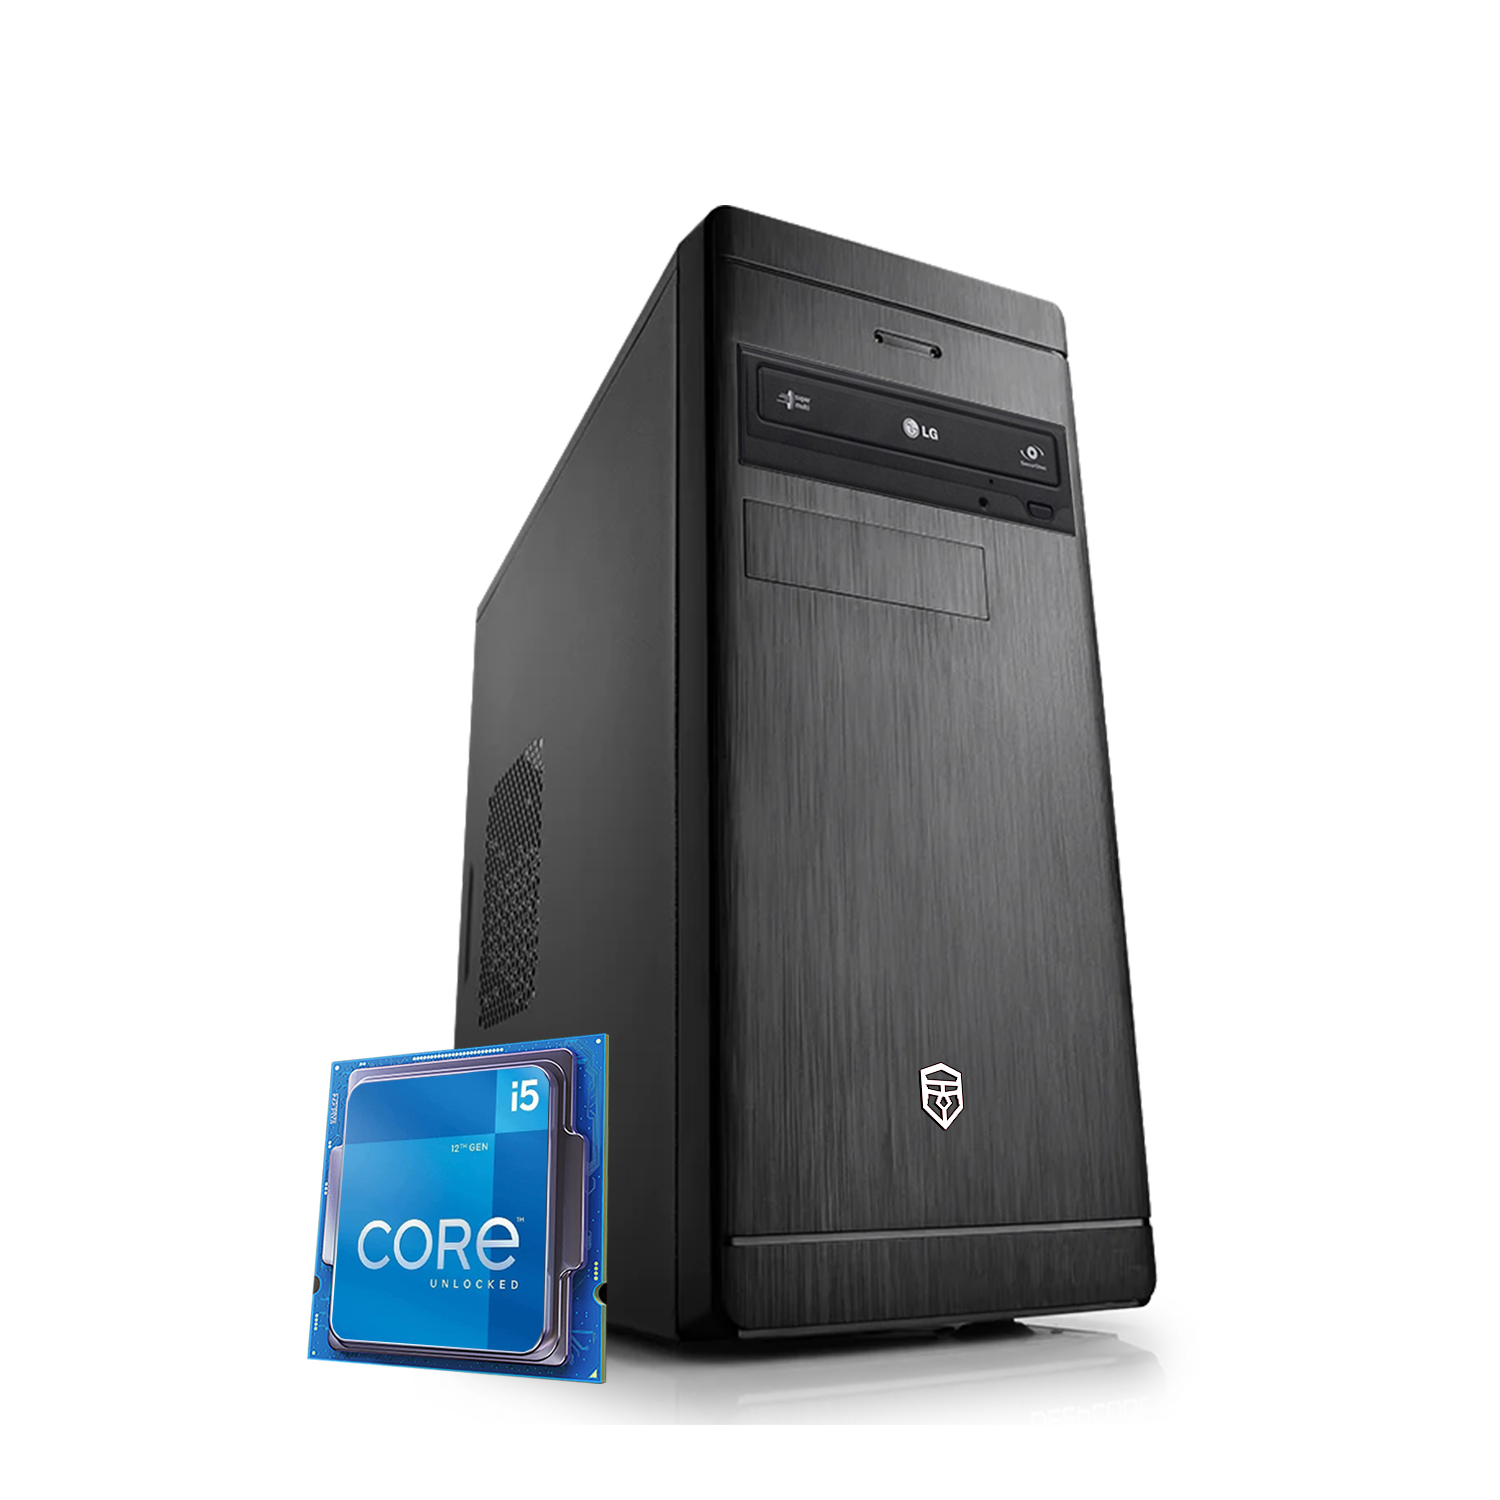 VISION V500 - DESKTOP PC i5 12400 up to 4.40ghz 6 core, Ram 32GB DDR4, SSD Nvme 1000GB, Wi-Fi, DVD burner, WIN 11 Pro, Assembled i5 fixed PC 